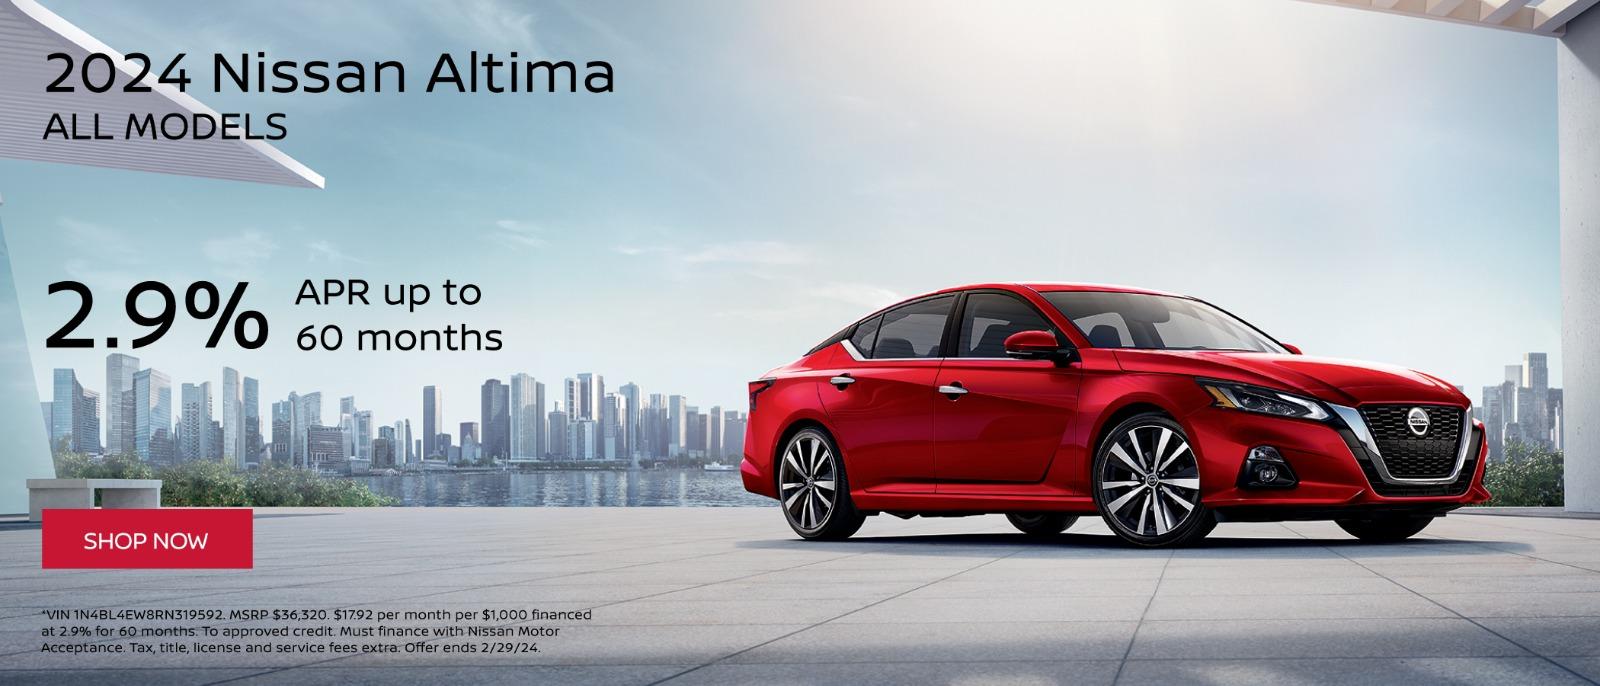 2024 Nissan Altima 2.9% APR Up to 60months